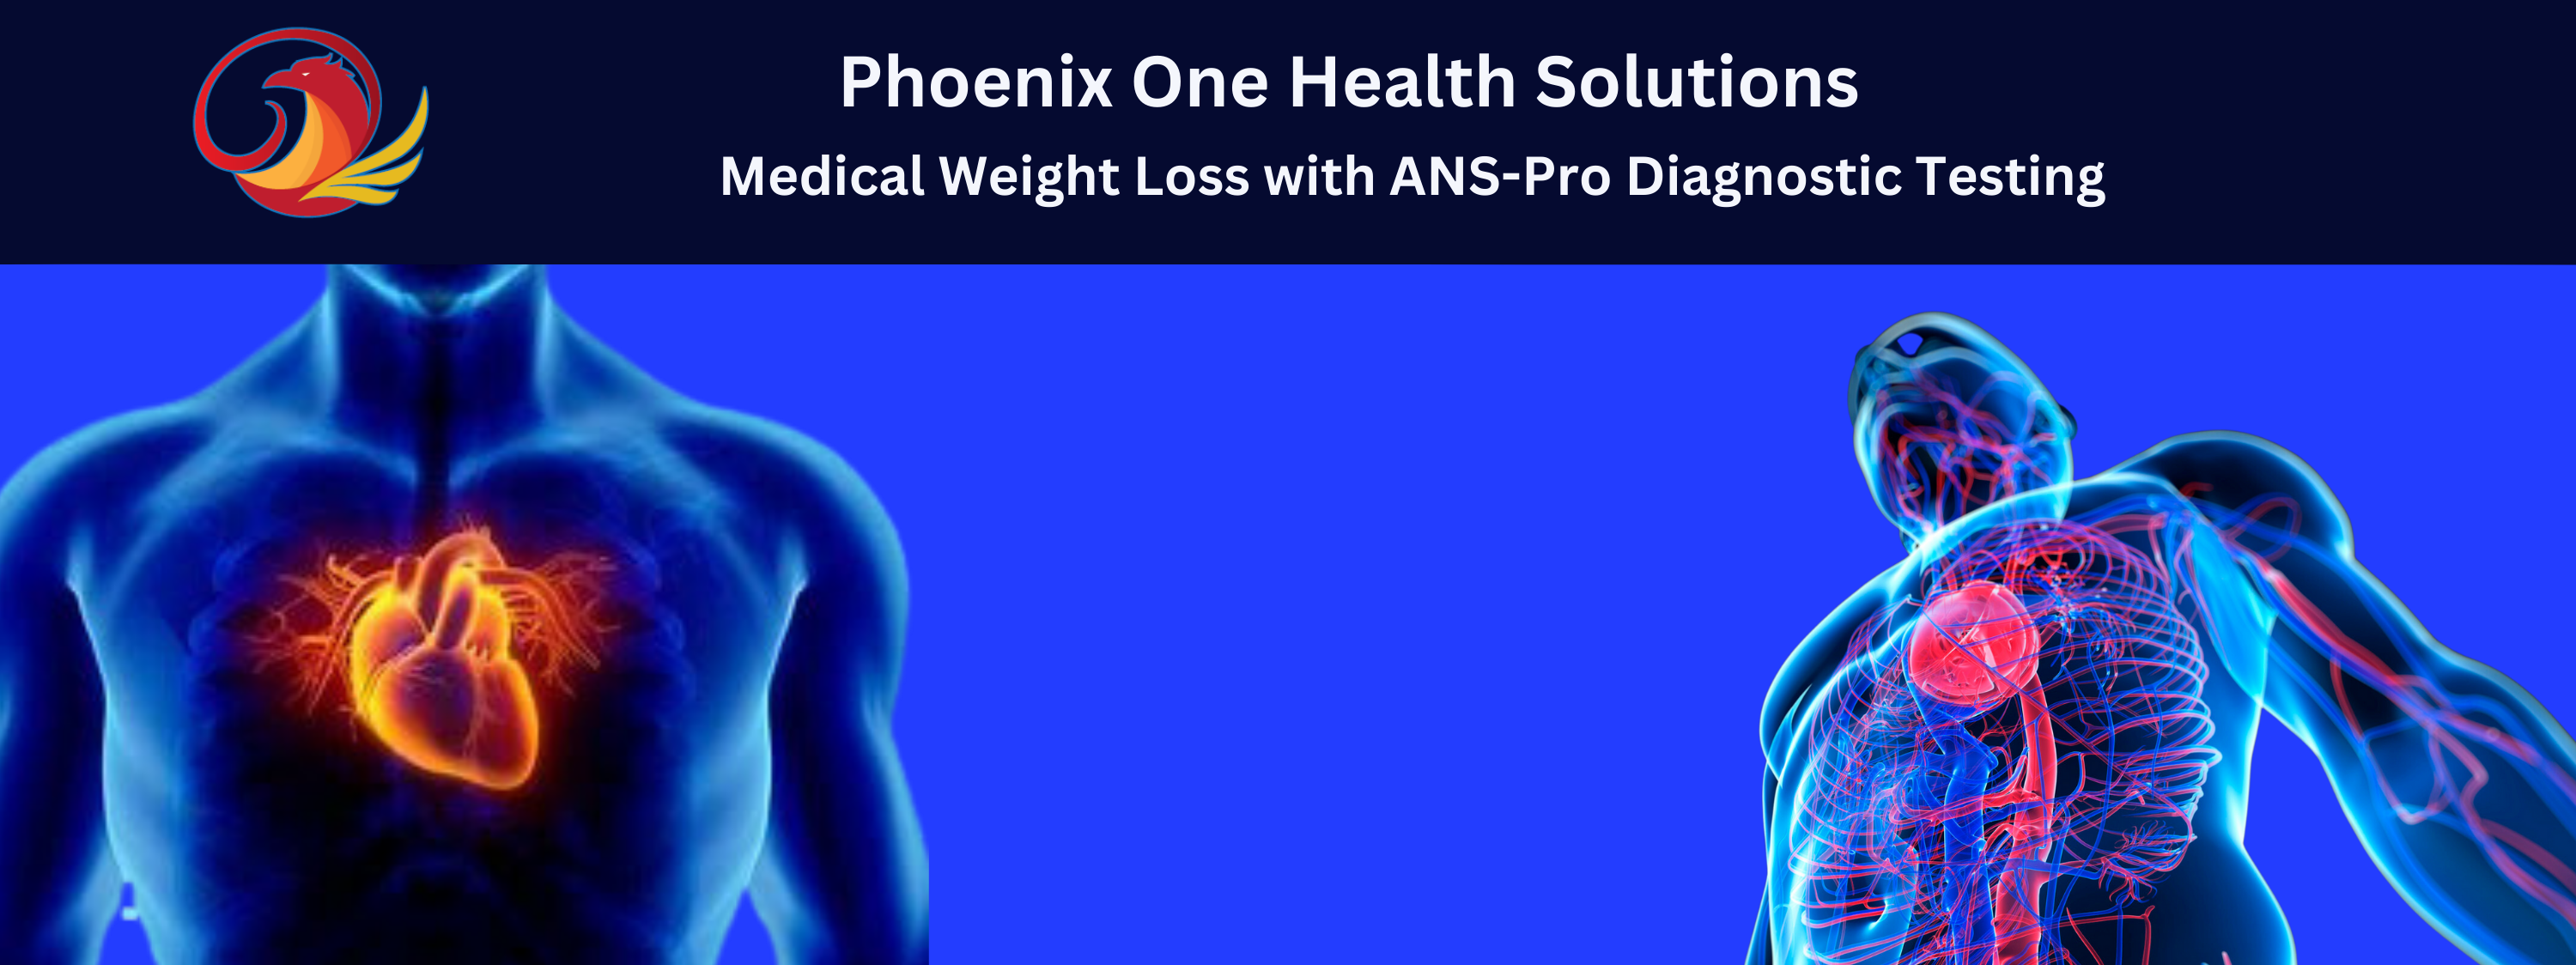 Medical Weight Loss Program with ANS-Pro Diagnostics